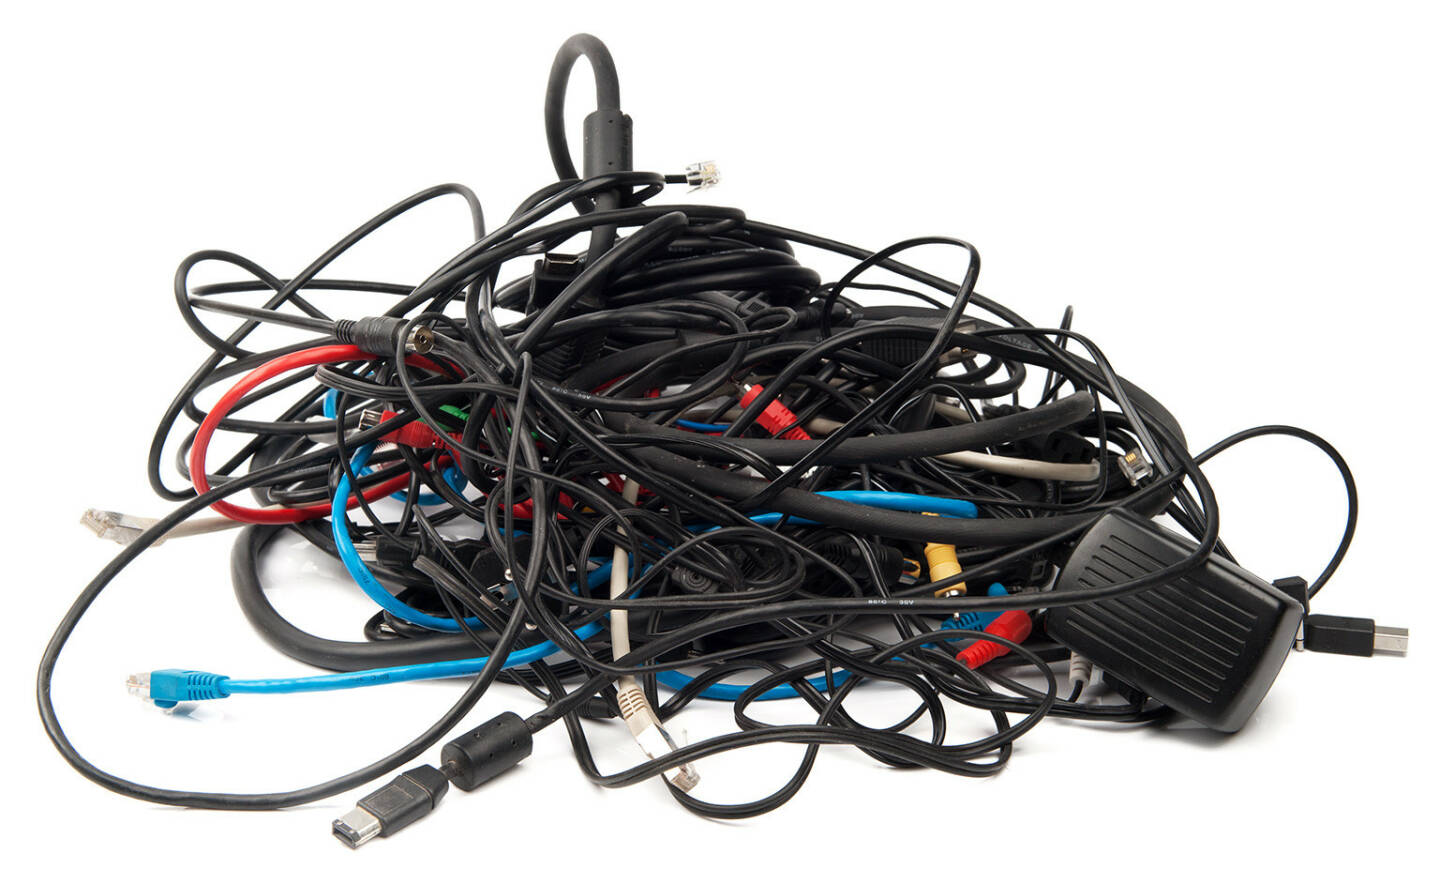 Kabel, Wirrwarr, Computer, http://www.shutterstock.com/de/pic-94209850/stock-photo-heap-of-computer-cables-isolated-on-white.html